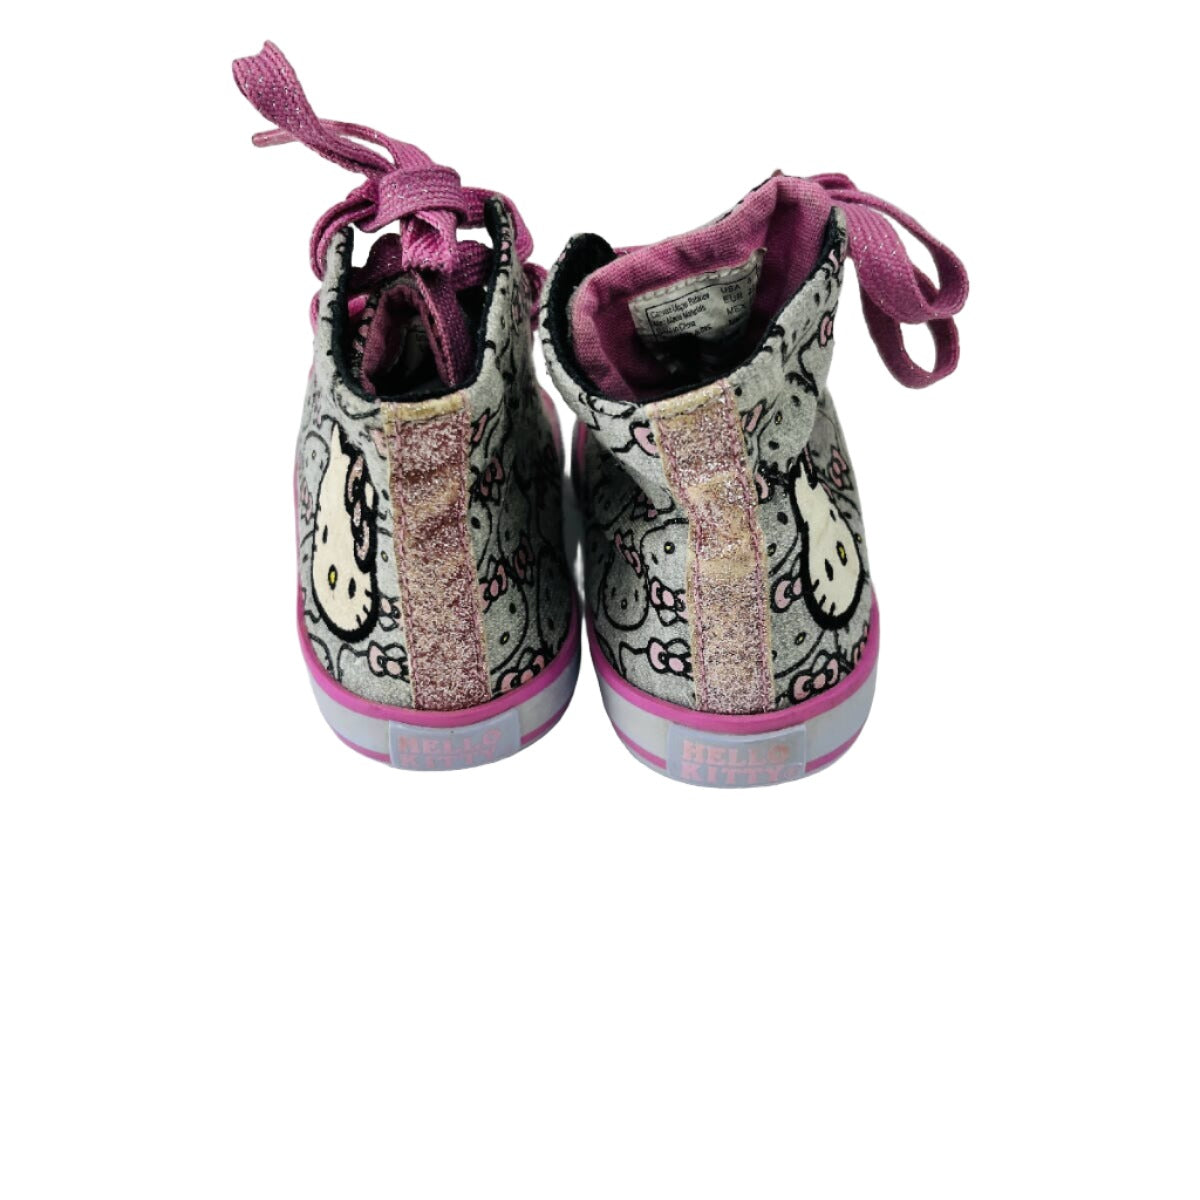 Kids Shoes: Hello Kitty Sparkle High Top Sneakers Pink Grey [7C US 